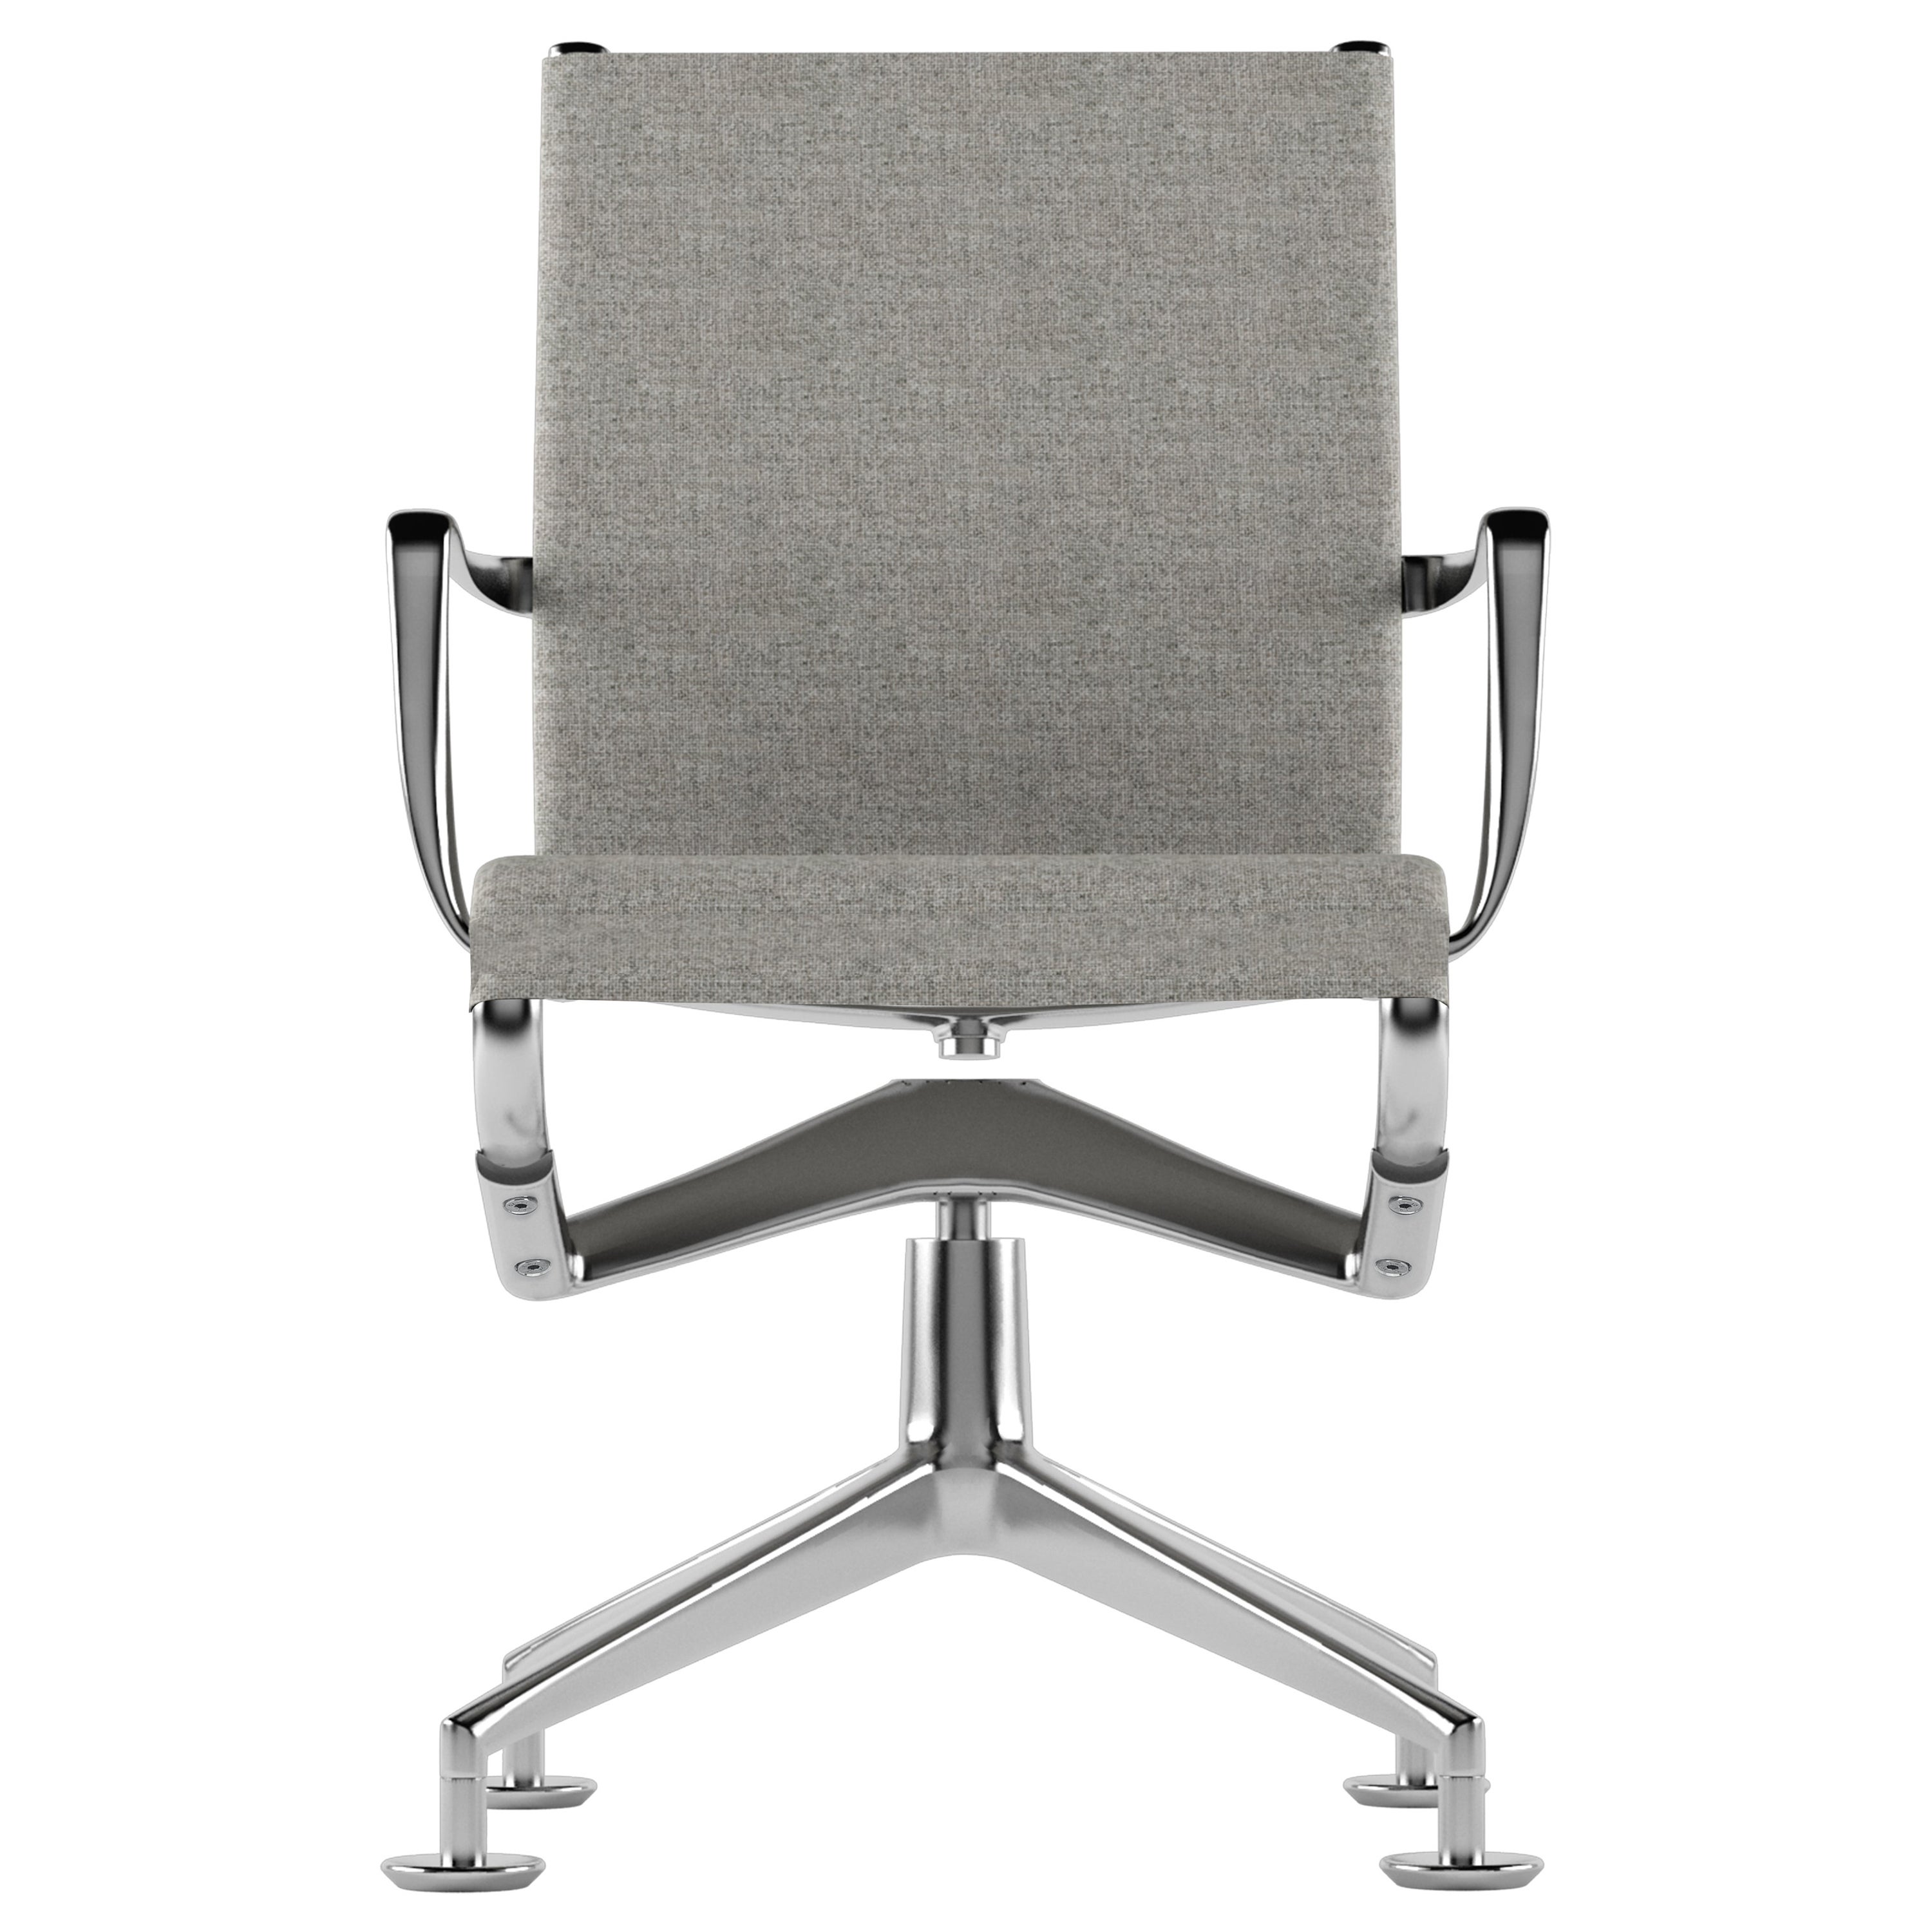 Alias 437 Meetingframe Swivel Chair in Grey Seat with Chromed Aluminum Frame For Sale